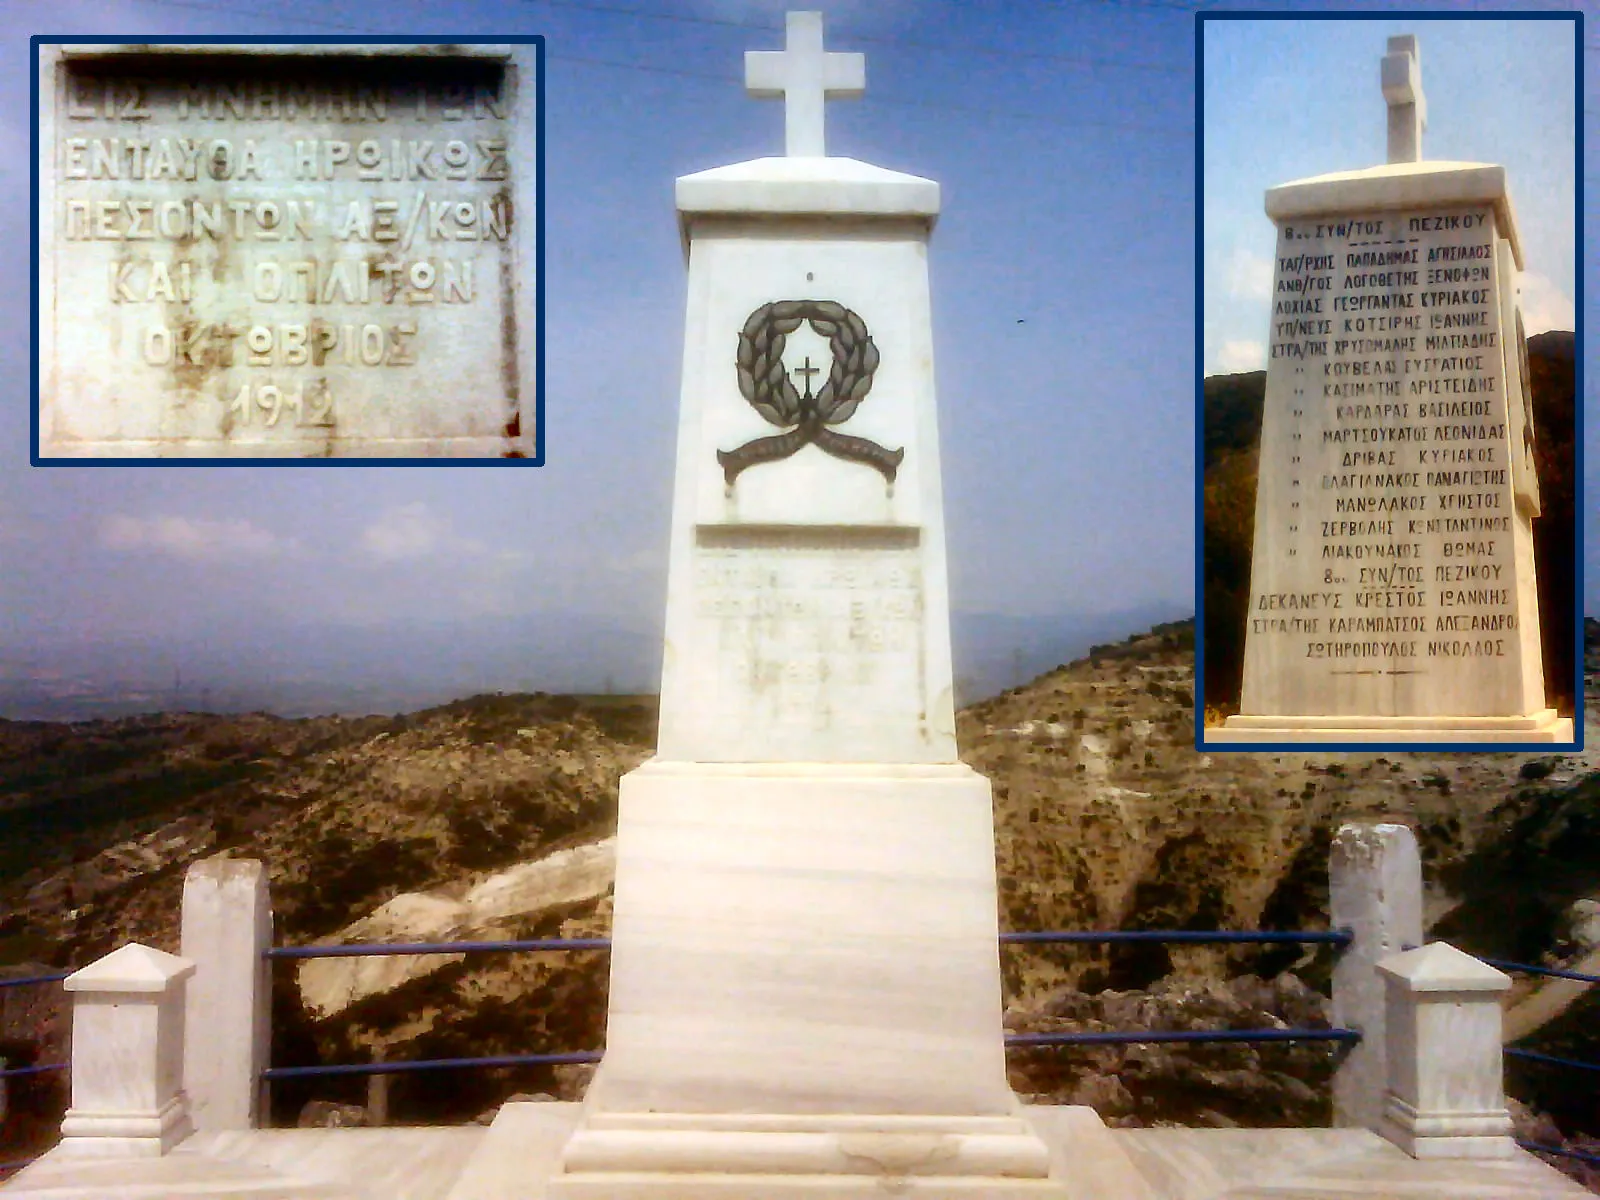 Photo showing: Monument commemorating the lost fighters of 1912, during the First Balkan War, at a battle site in west Macedonia, Greece.